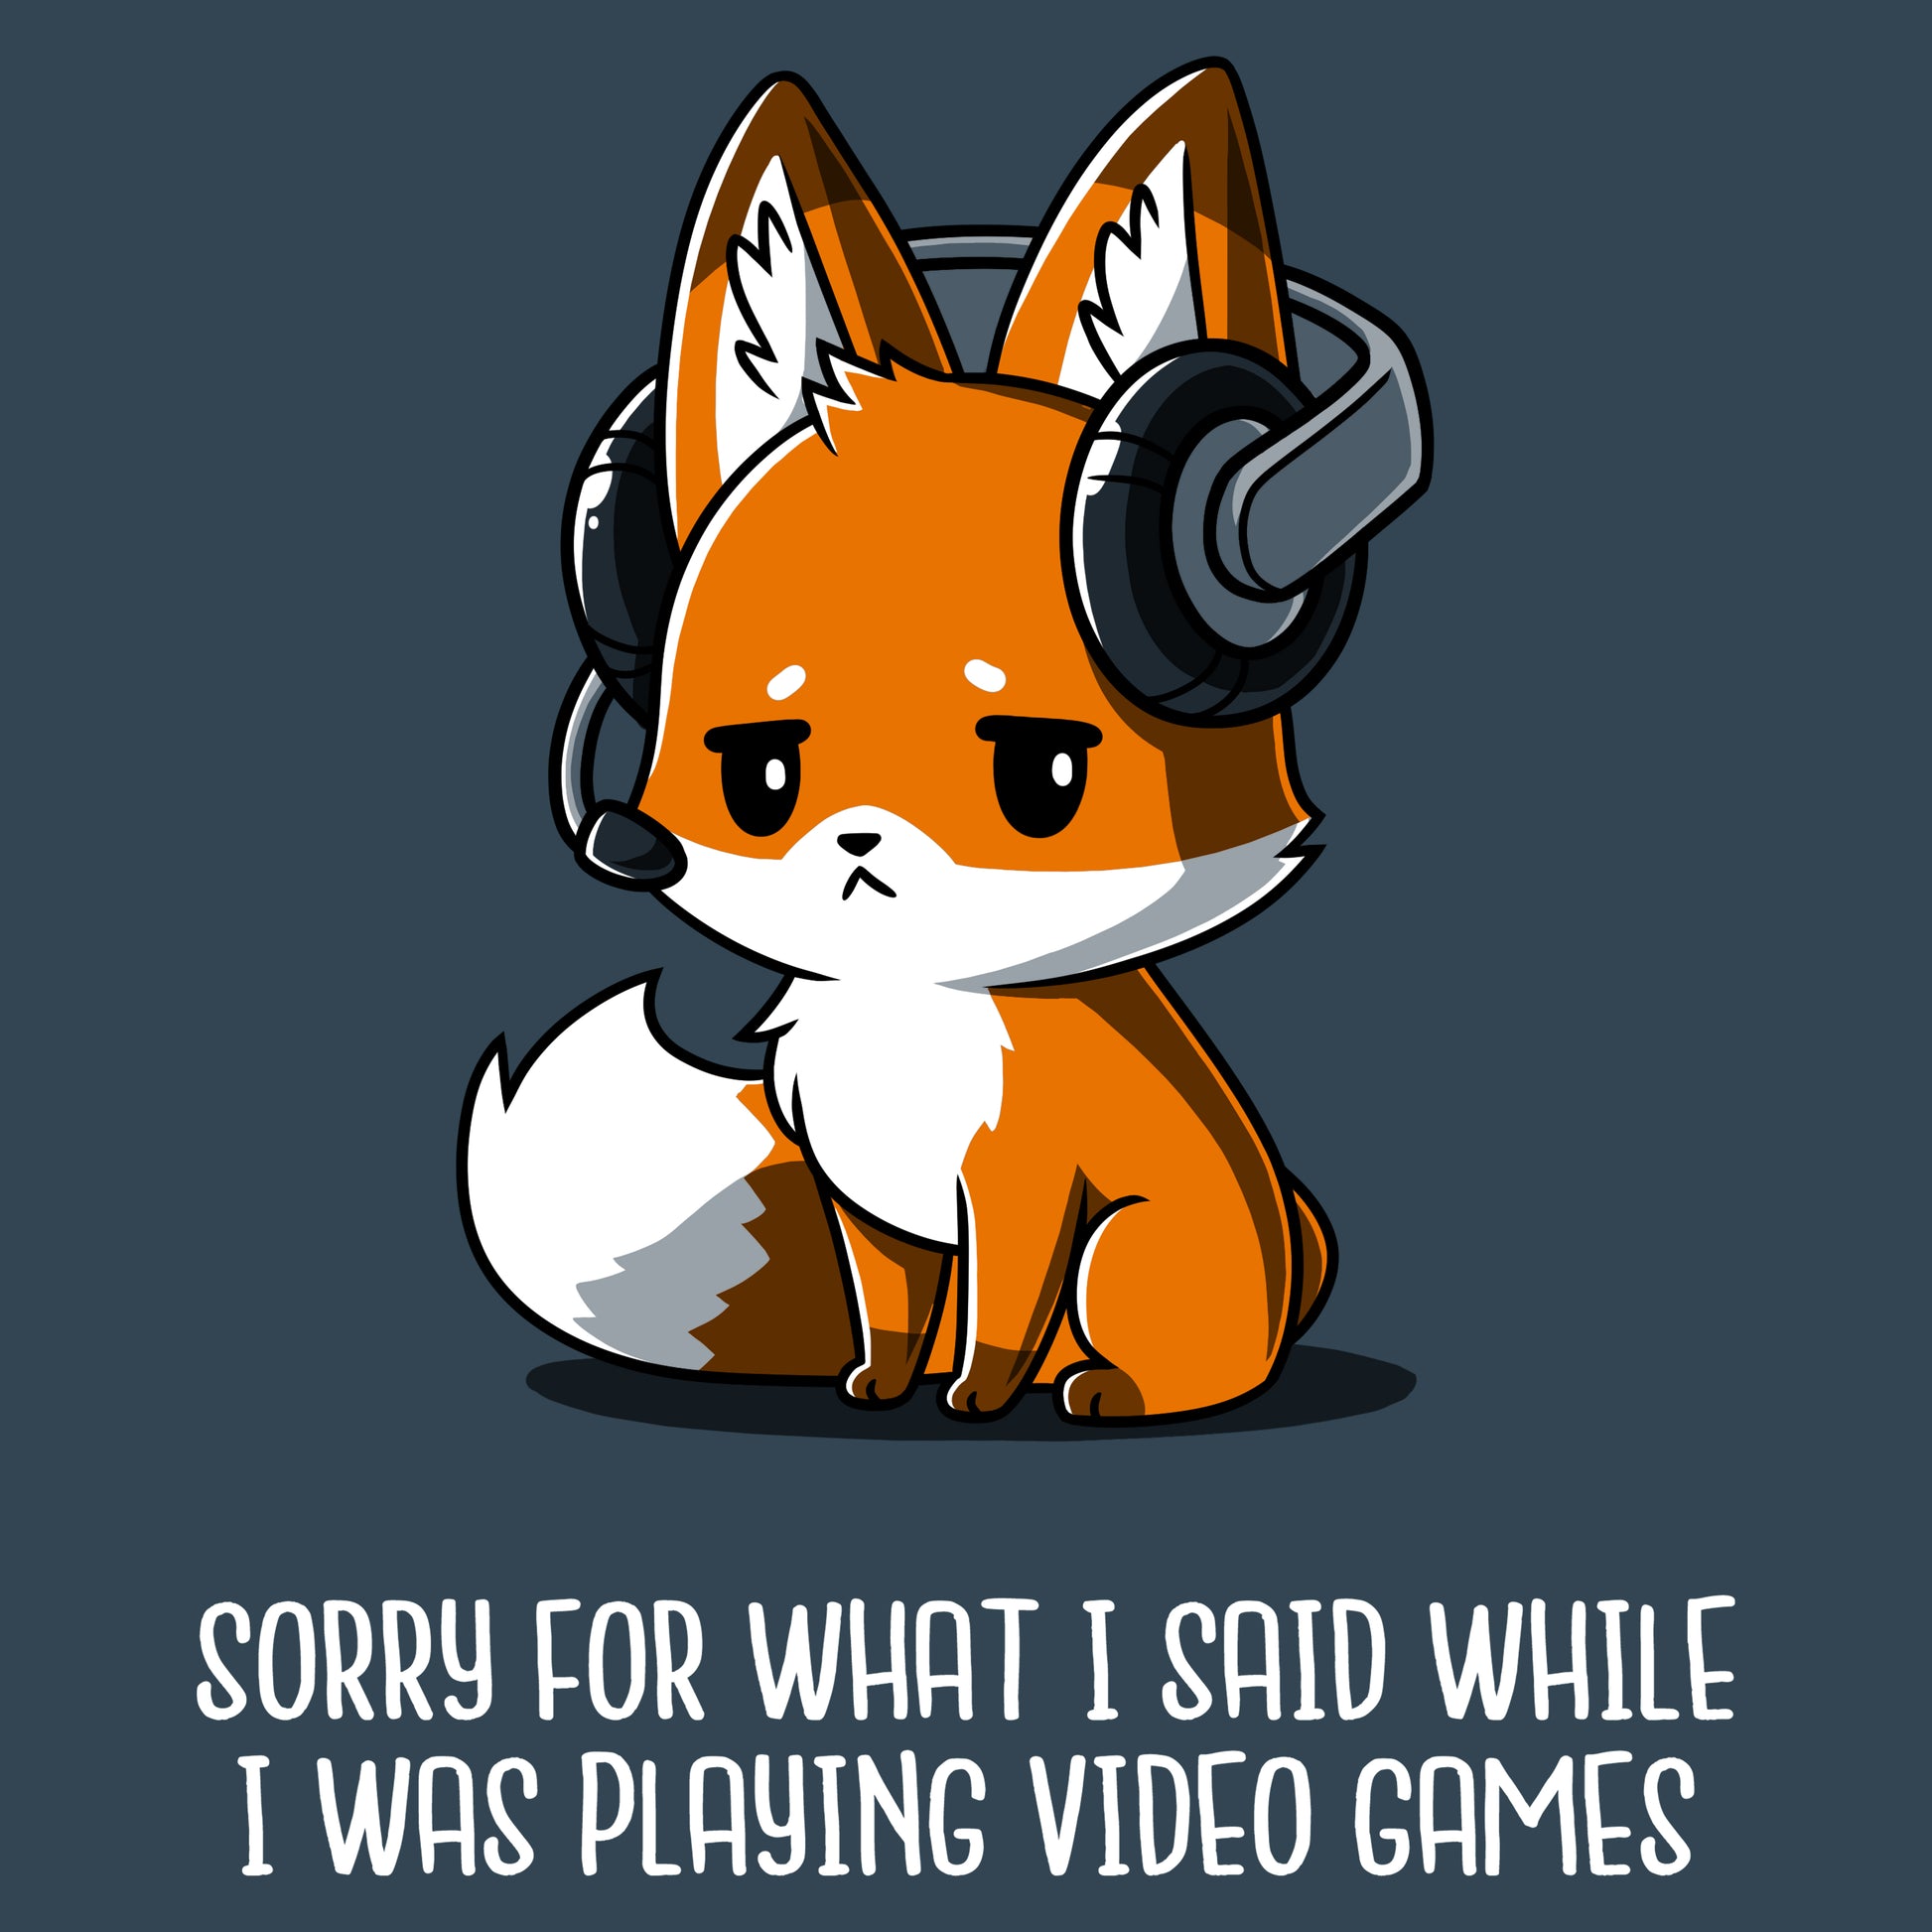 TeeTurtle's Sorry For What I Said is the perfect apology for video game behavior.